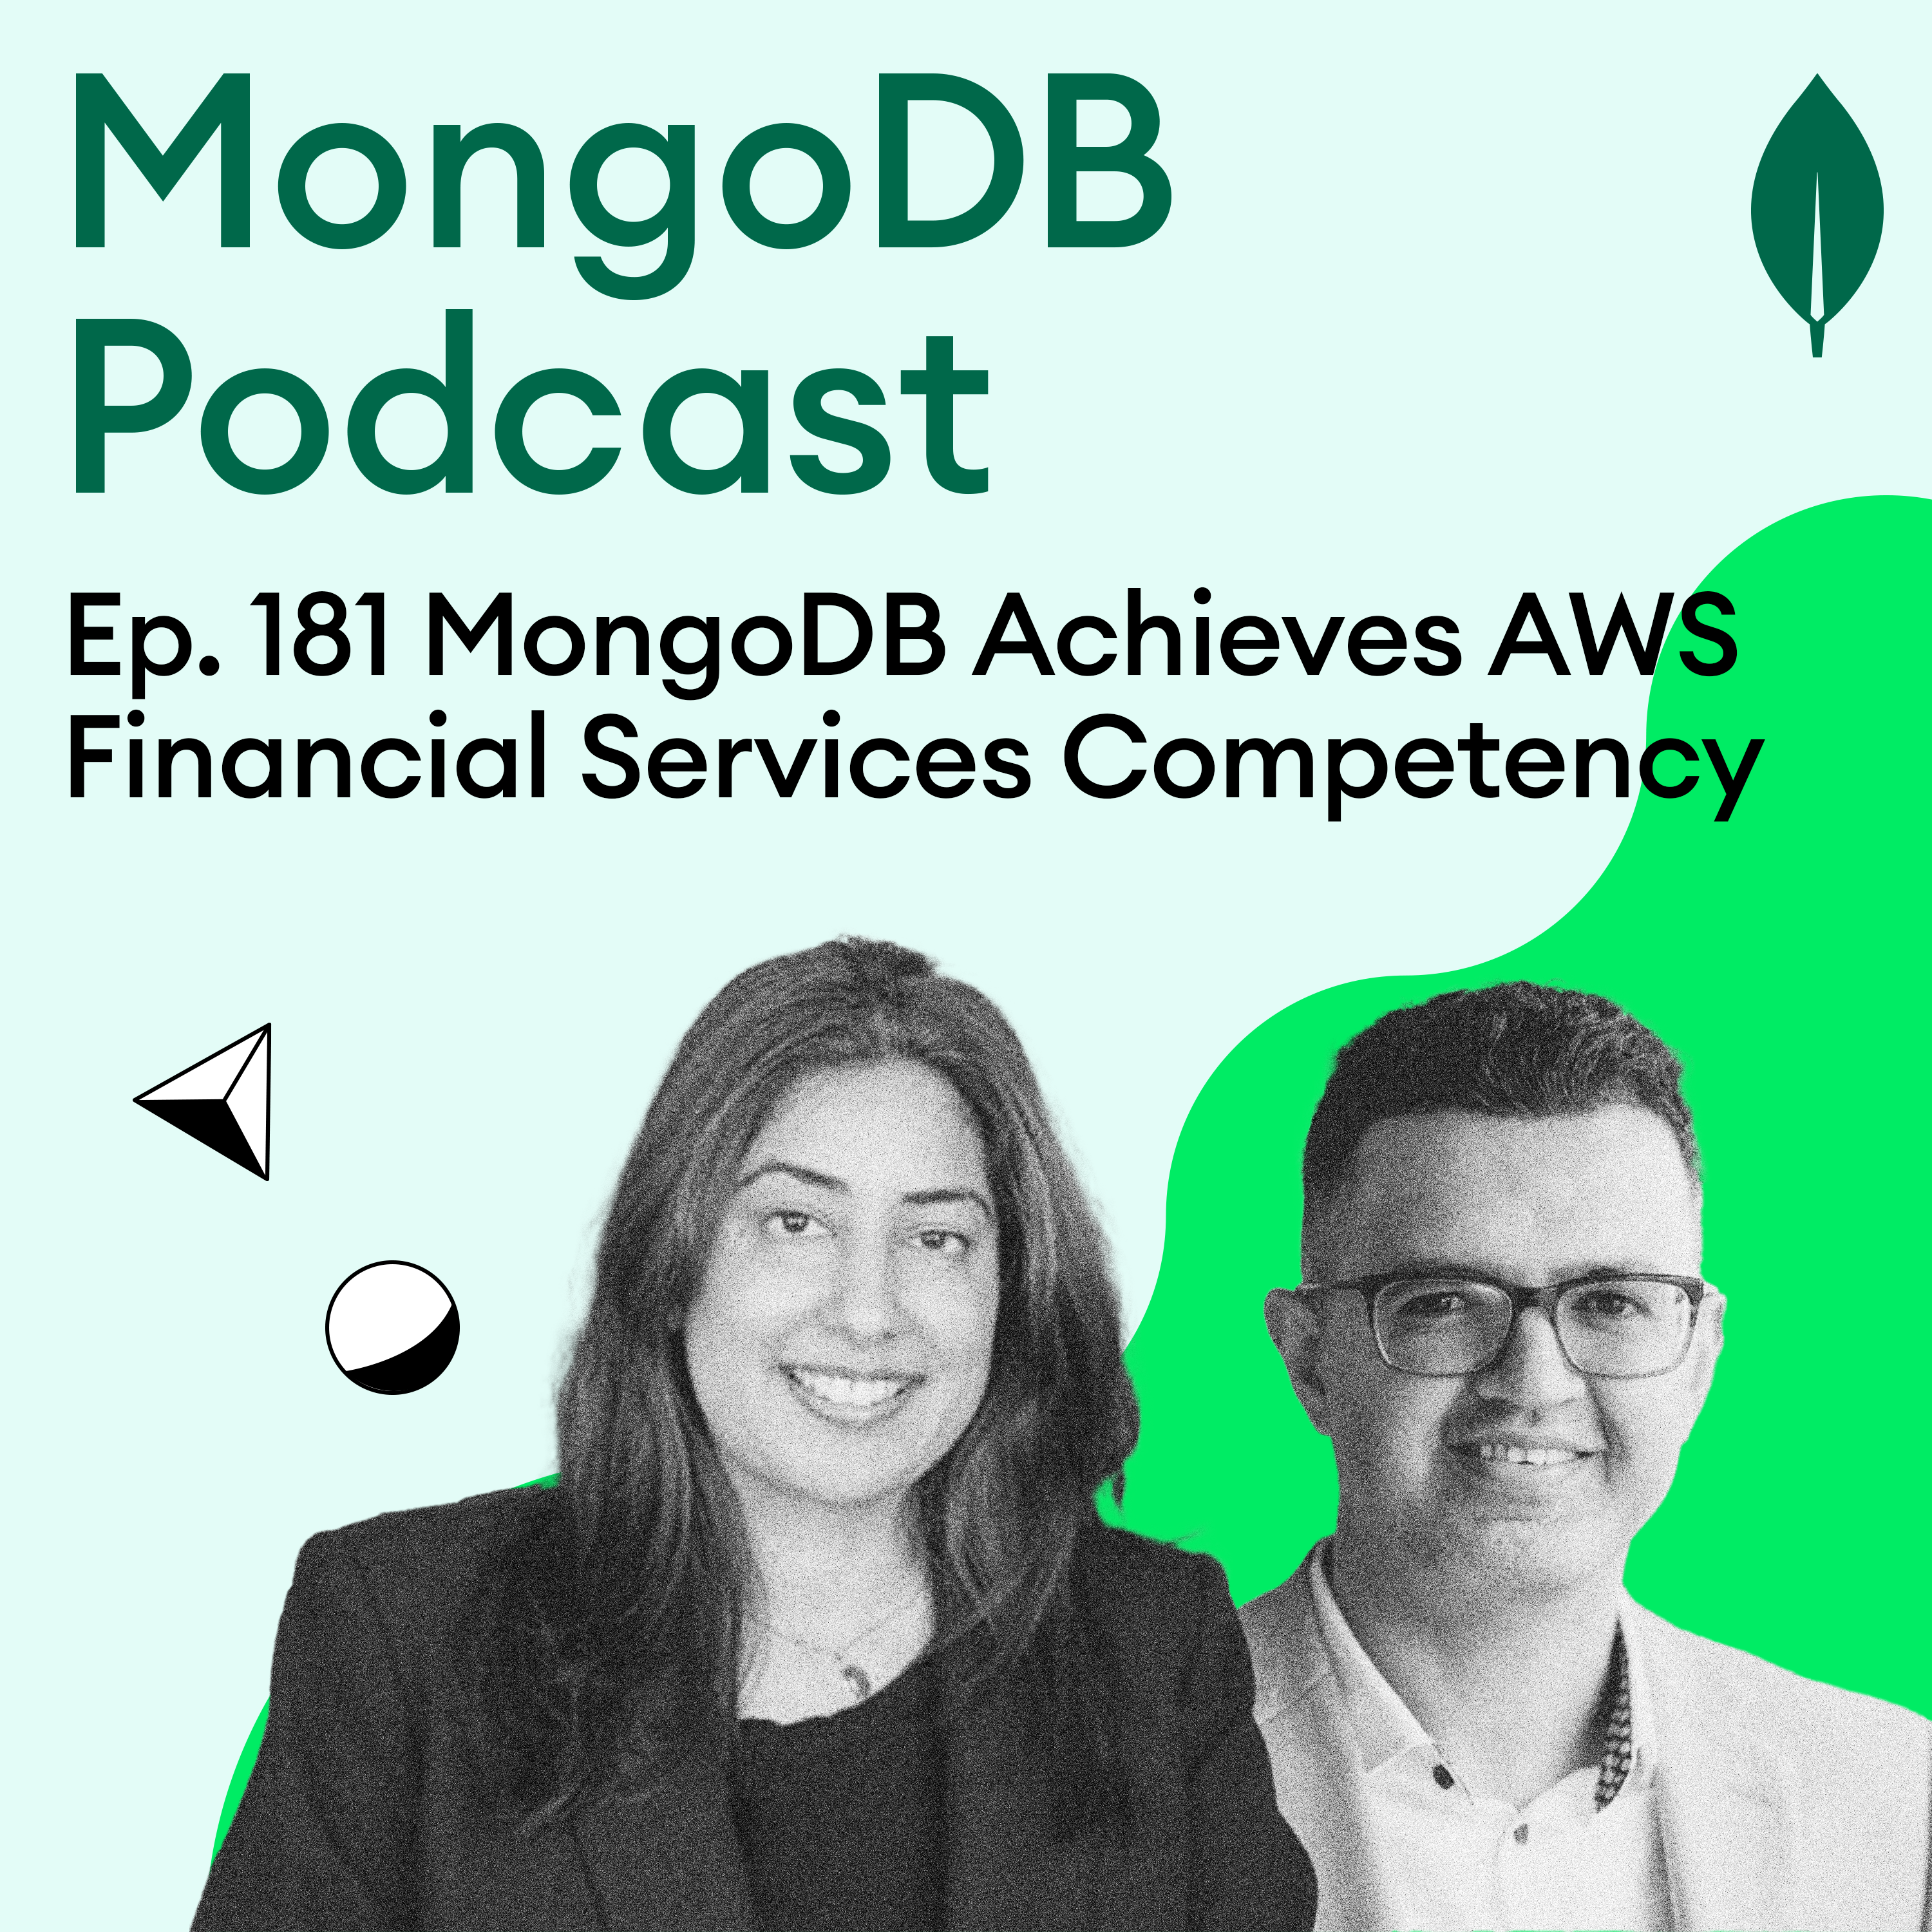 Ep. 181 MongoDB Achieves AWS Financial Services Competency